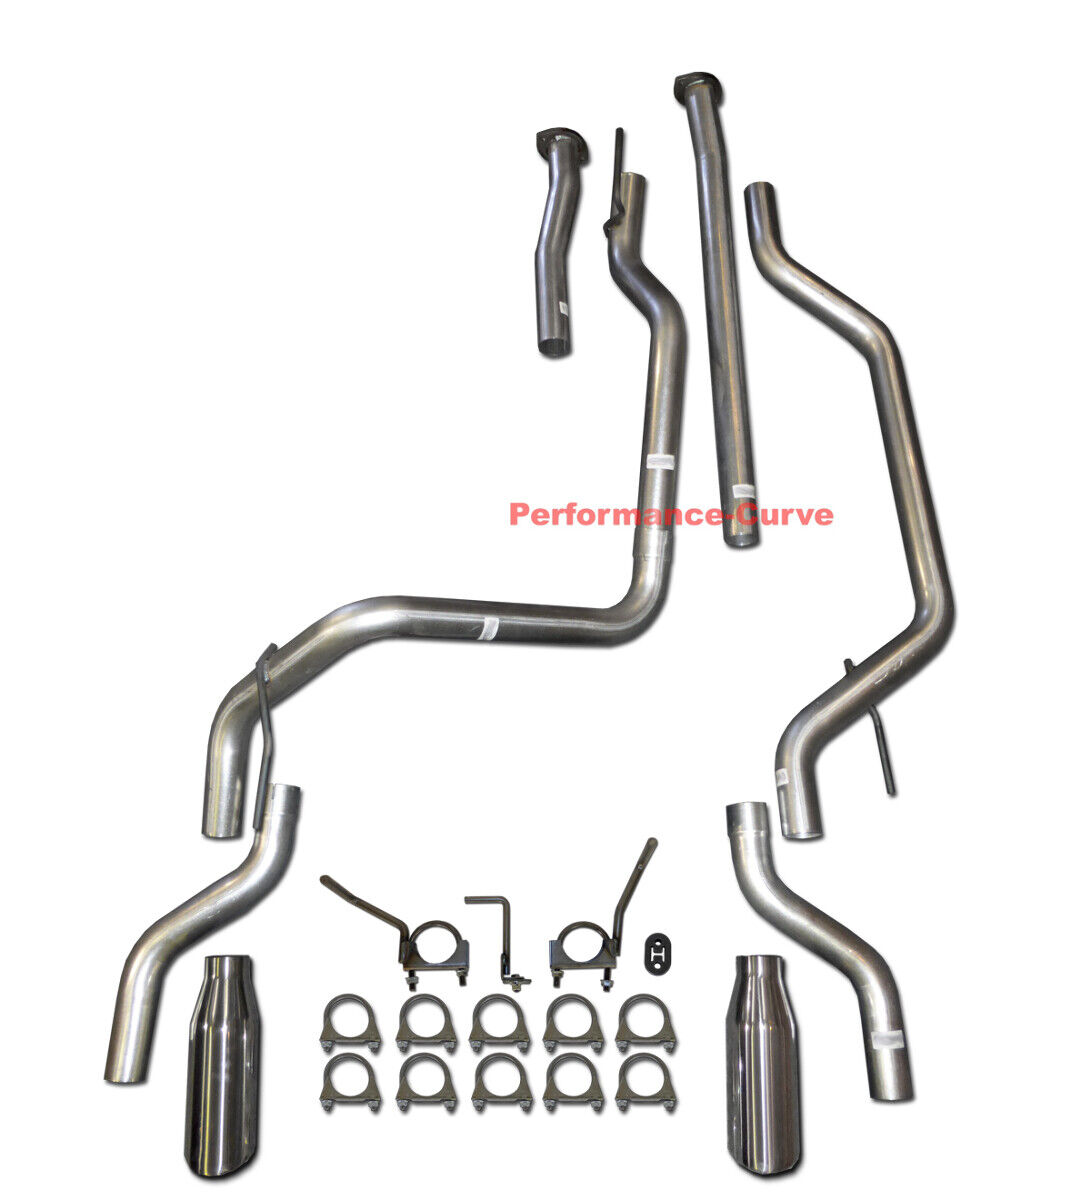 Fits 09 - 20 Toyota Tundra 4.0 - 5.7 Performance Dual Exhaust CatBack Pipe Kit